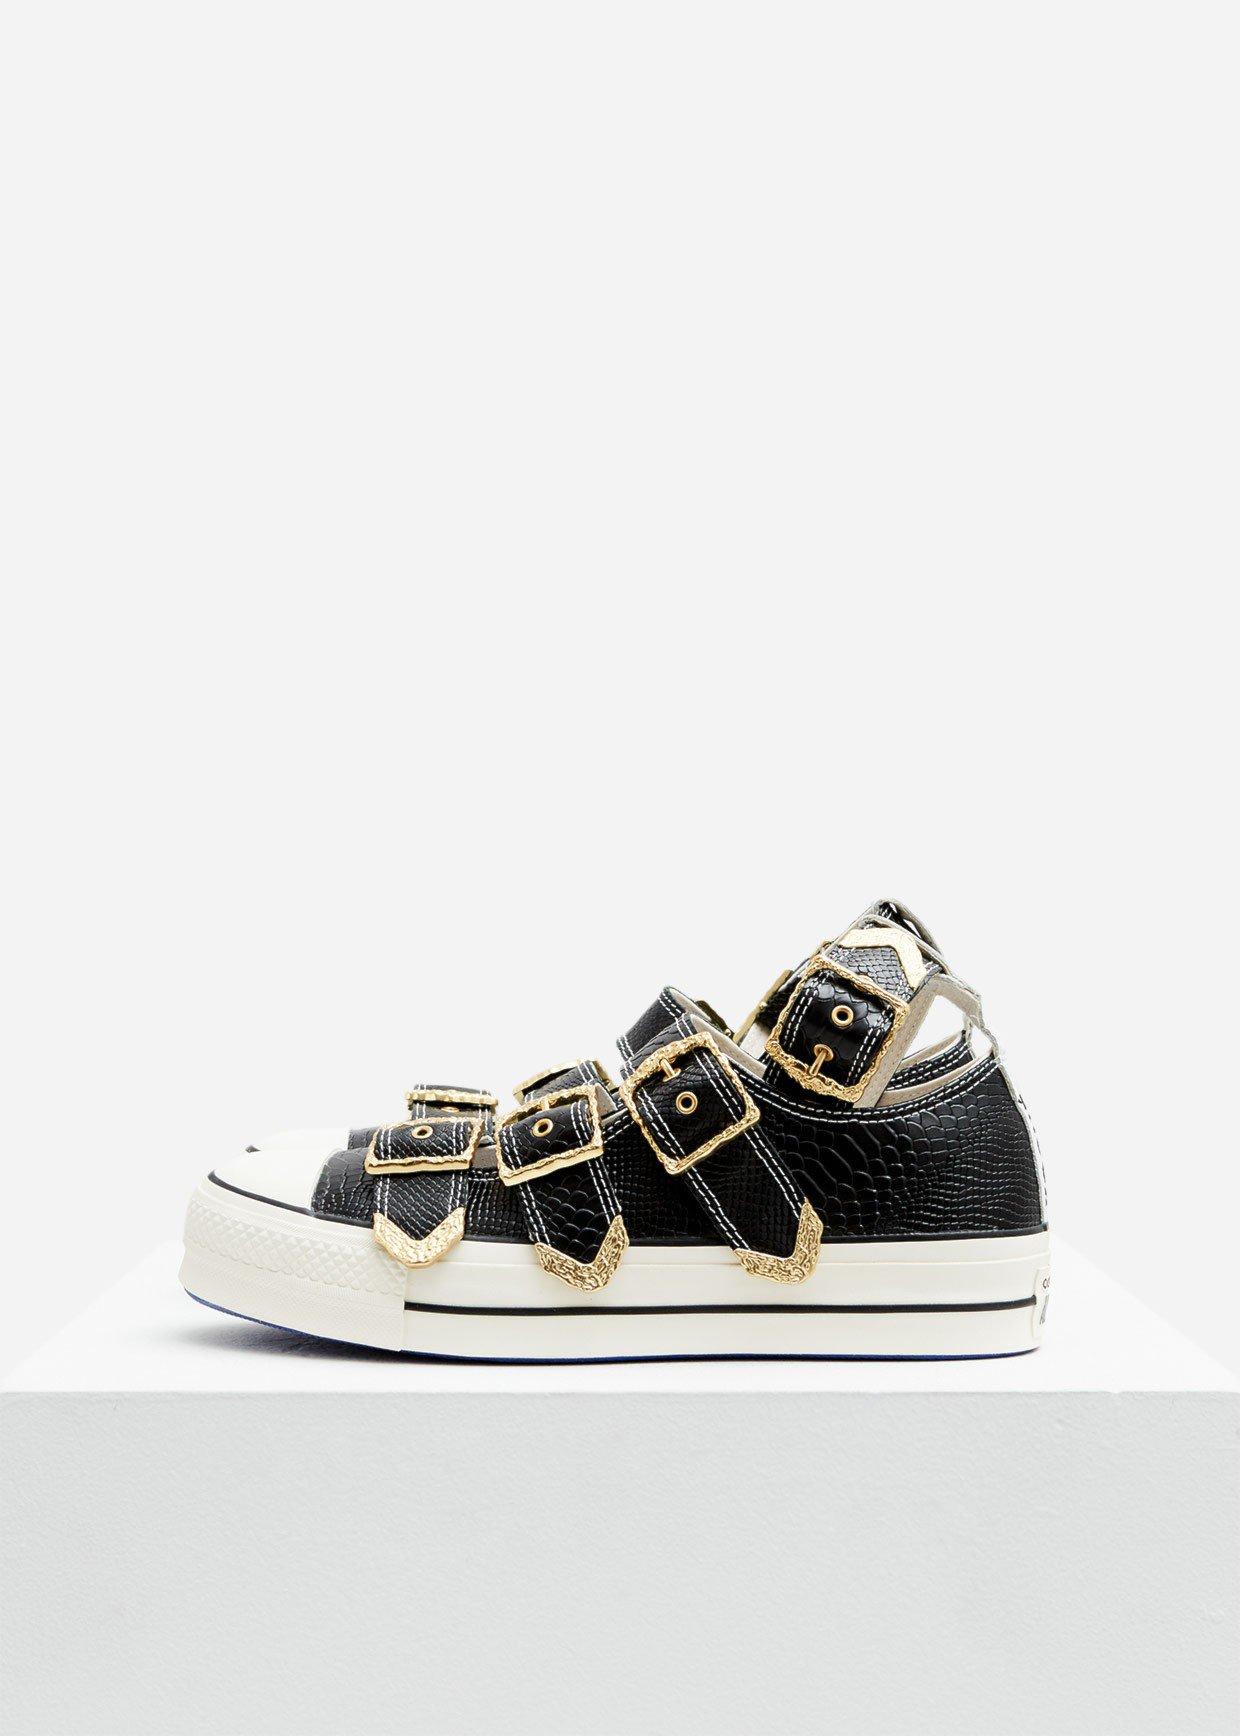 Converse X Koché Chuck Taylor All Star Mary Jane Sneakers in Black - Lyst